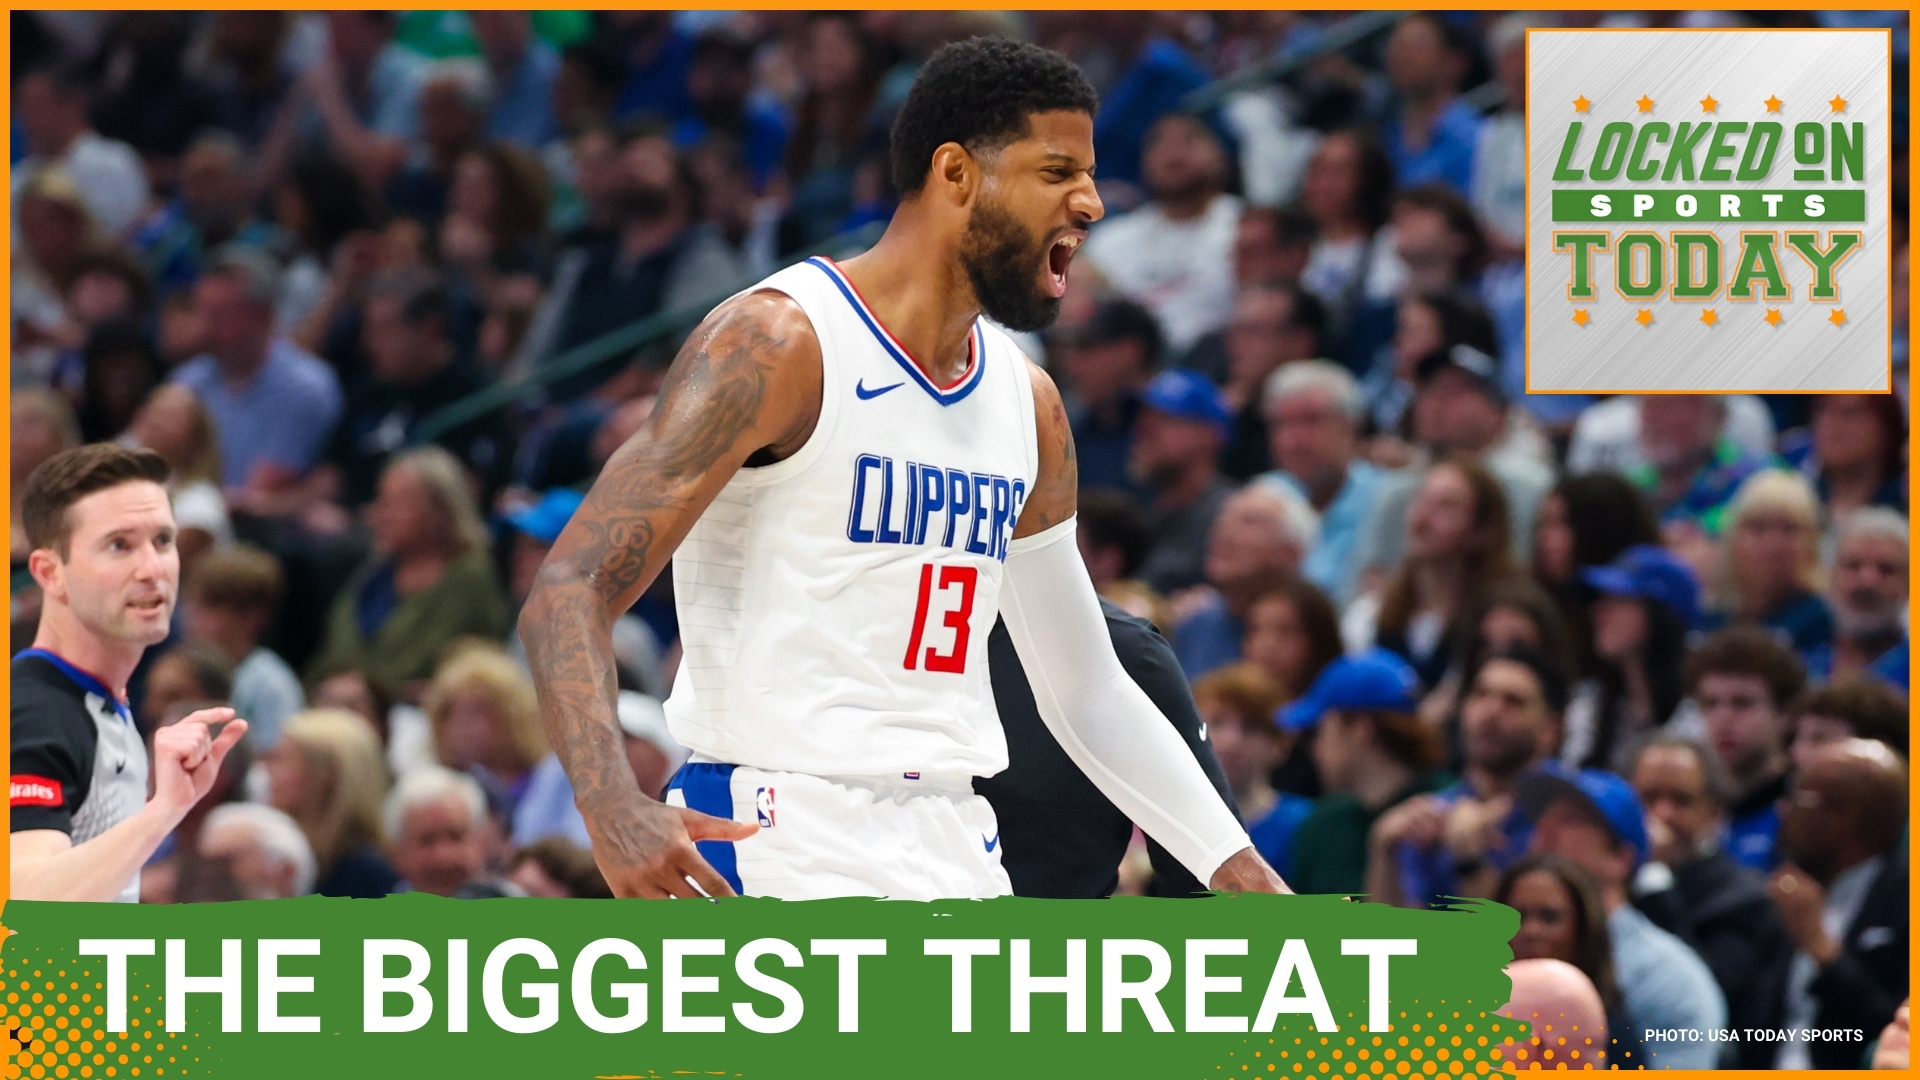 There’s a new big three in Philadelphia. Does Paul George make the Sixers the biggest threat to the Celtics? Is Klay Thompson what the Mavs need to win a title?